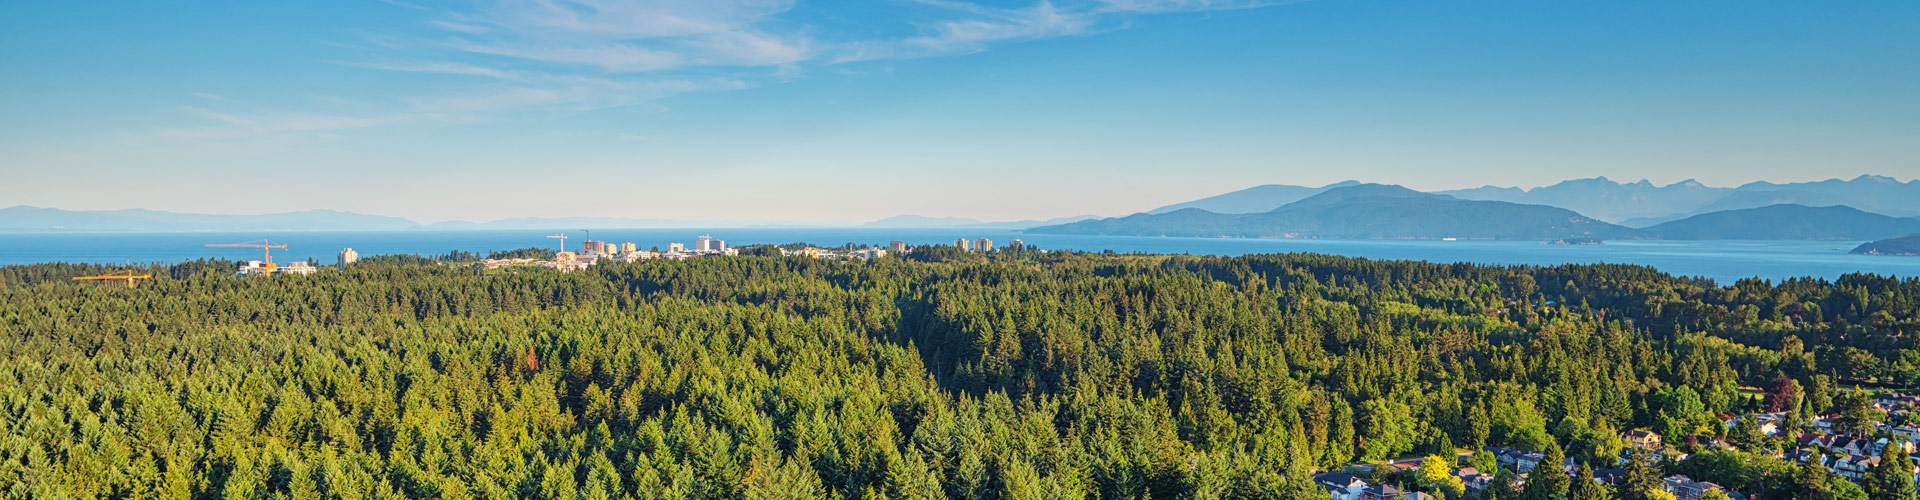 aerial view of UBC Vancouver campus with forest in the foreground and mountains in the background